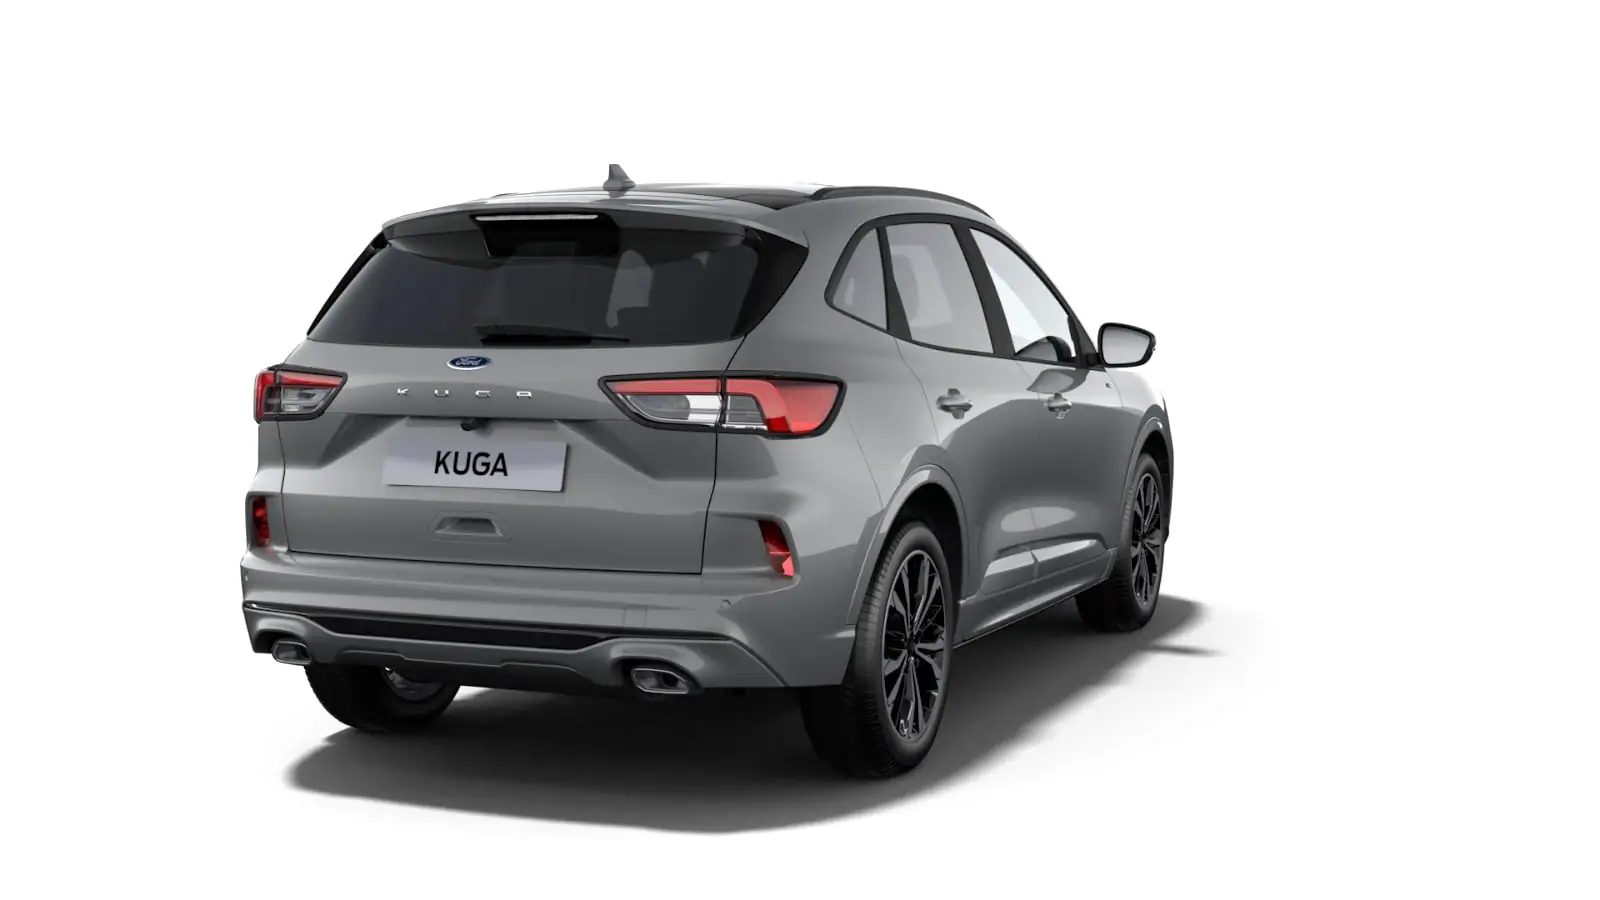 Nieuw Ford All-new kuga ST-Line X 1.5i EcoBoost 150pk/110kW - M6 NYH - "Solar Silver" Metaalkleur 3